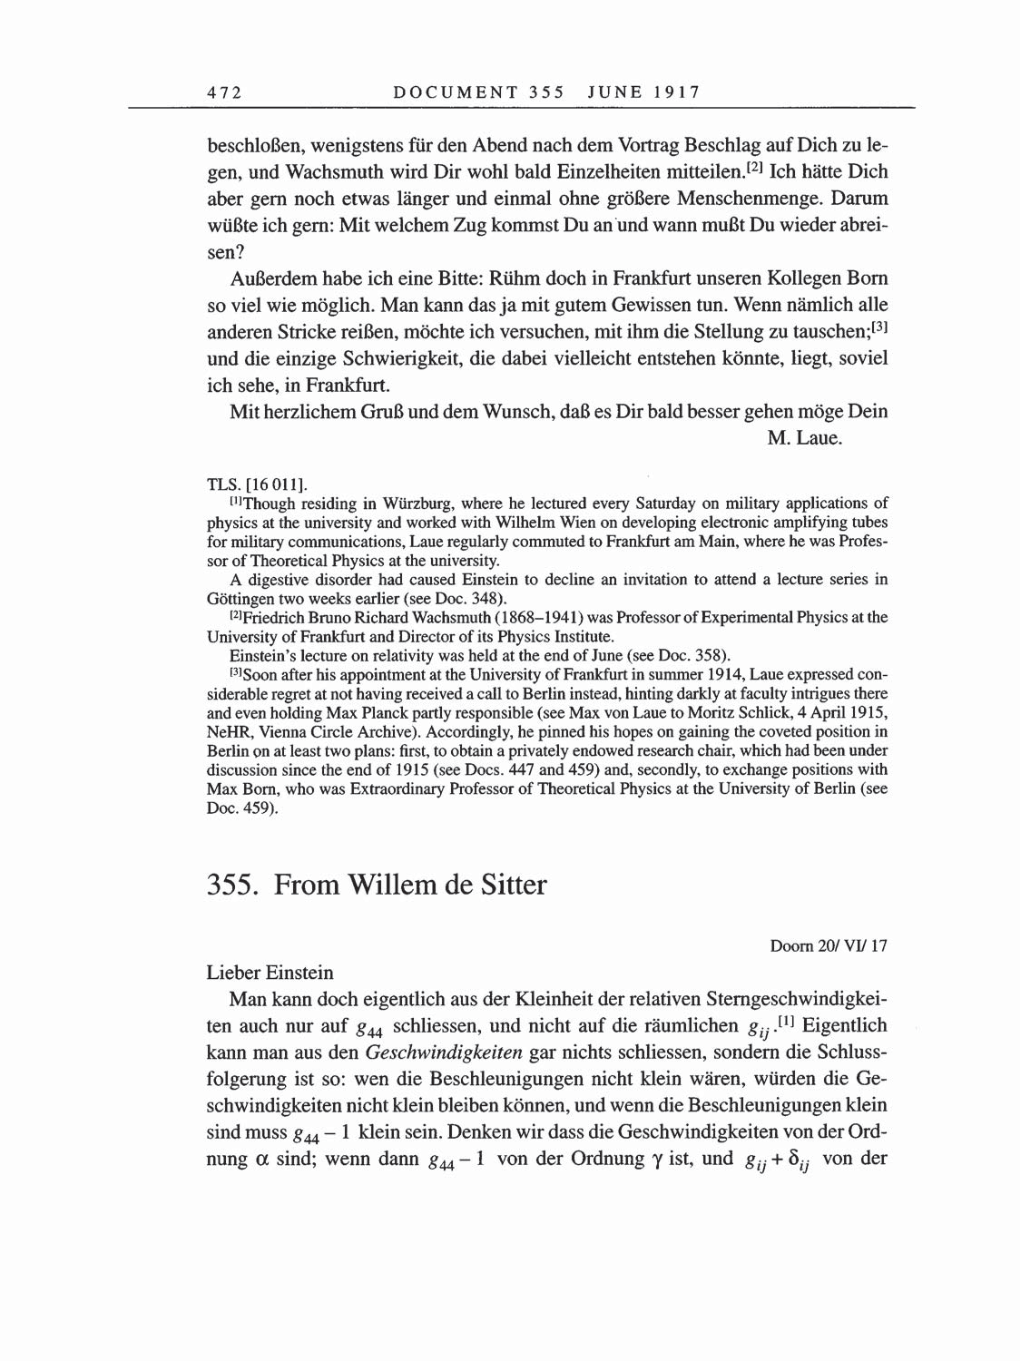 Volume 8, Part A: The Berlin Years: Correspondence 1914-1917 page 472